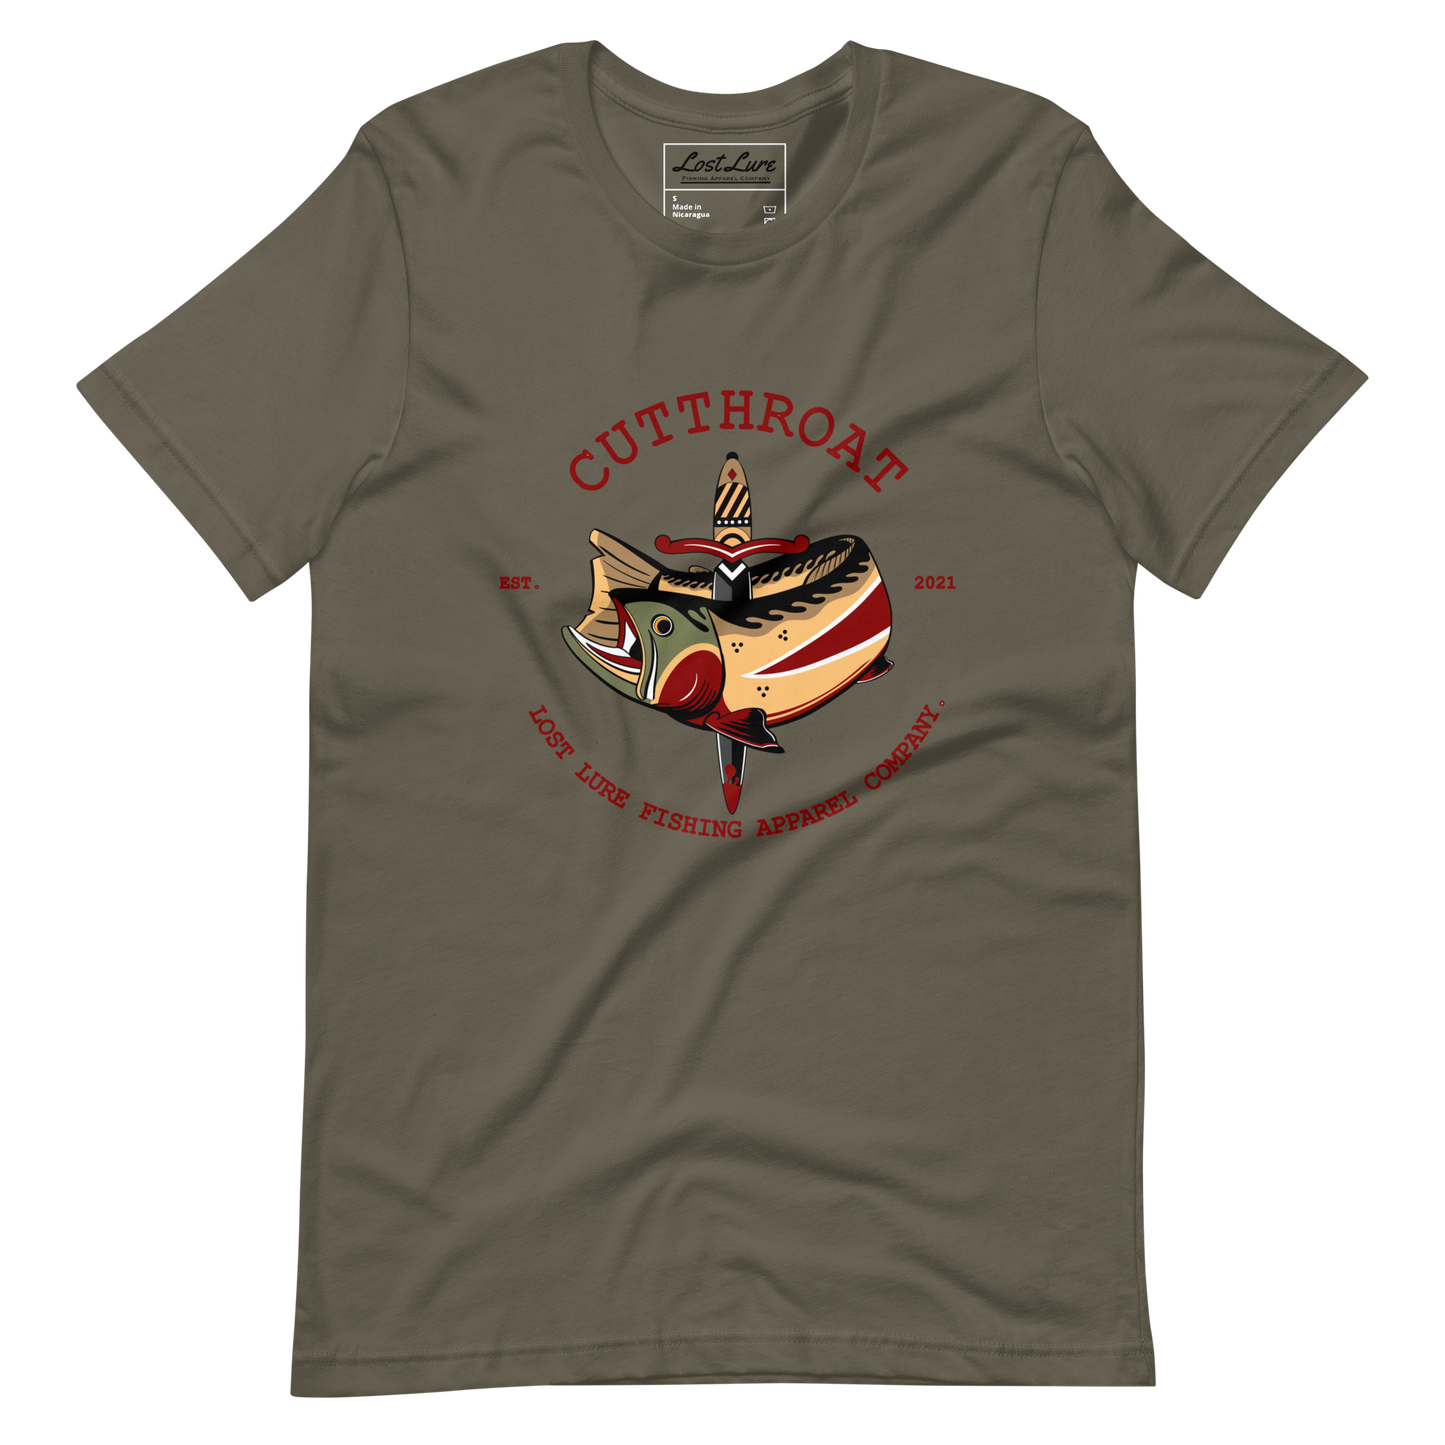 Cutthroat Trout fishing shirt. It’s an American traditional style design with a cutthroat trout and a dagger. The shirt reads Cutthroat trout, est. 2021, lost lure fishing apparel company. The fishing design is on the front of the shirt. Military green fishing shirt, front side